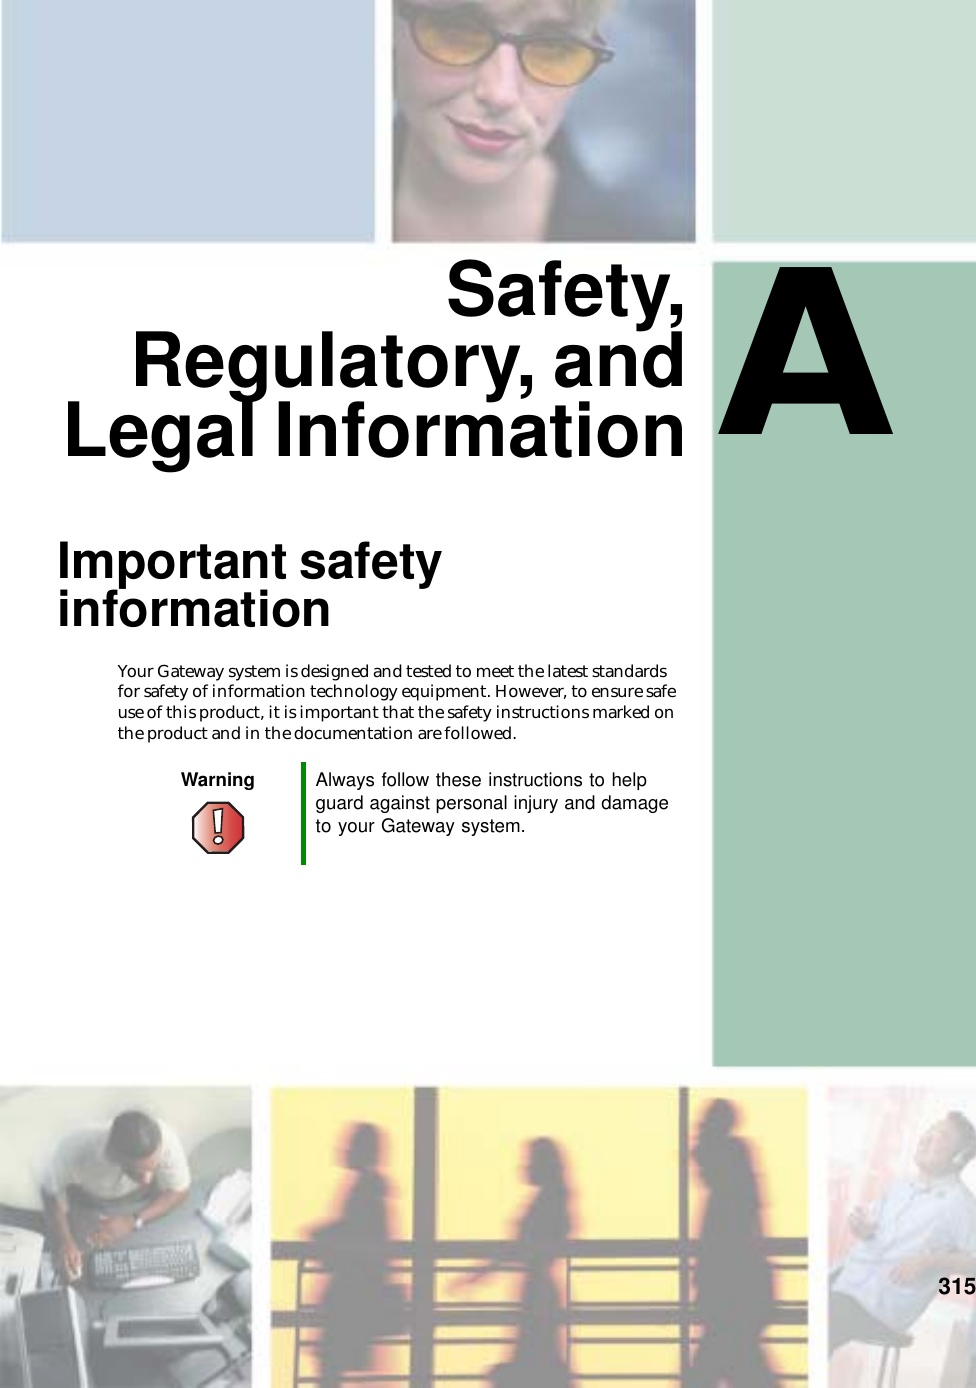 A315Safety,Regulatory, andLegal InformationImportant safety informationYour Gateway system is designed and tested to meet the latest standards for safety of information technology equipment. However, to ensure safe use of this product, it is important that the safety instructions marked on the product and in the documentation are followed.Warning Always follow these instructions to help guard against personal injury and damage to your Gateway system.